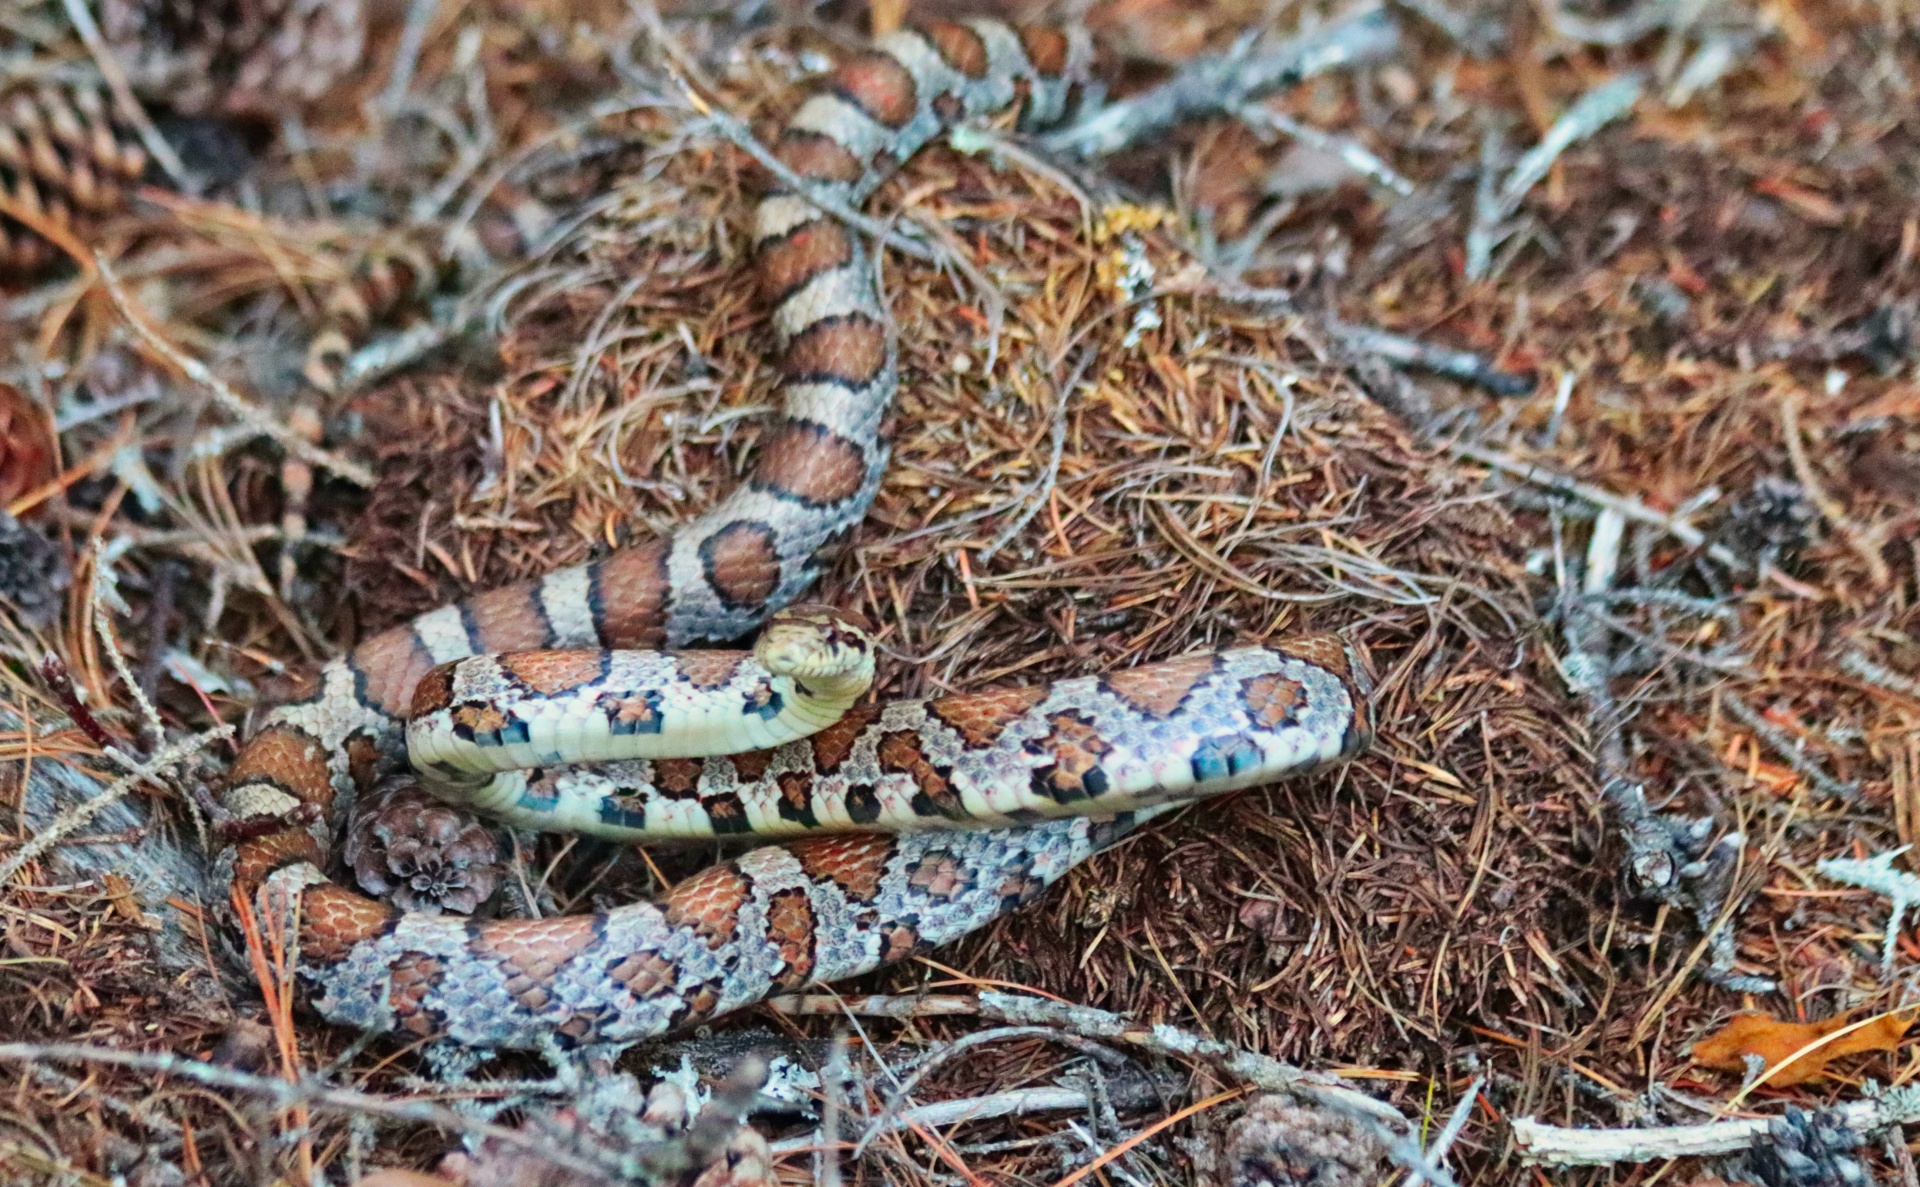 photo of a snake in Acadia National Park